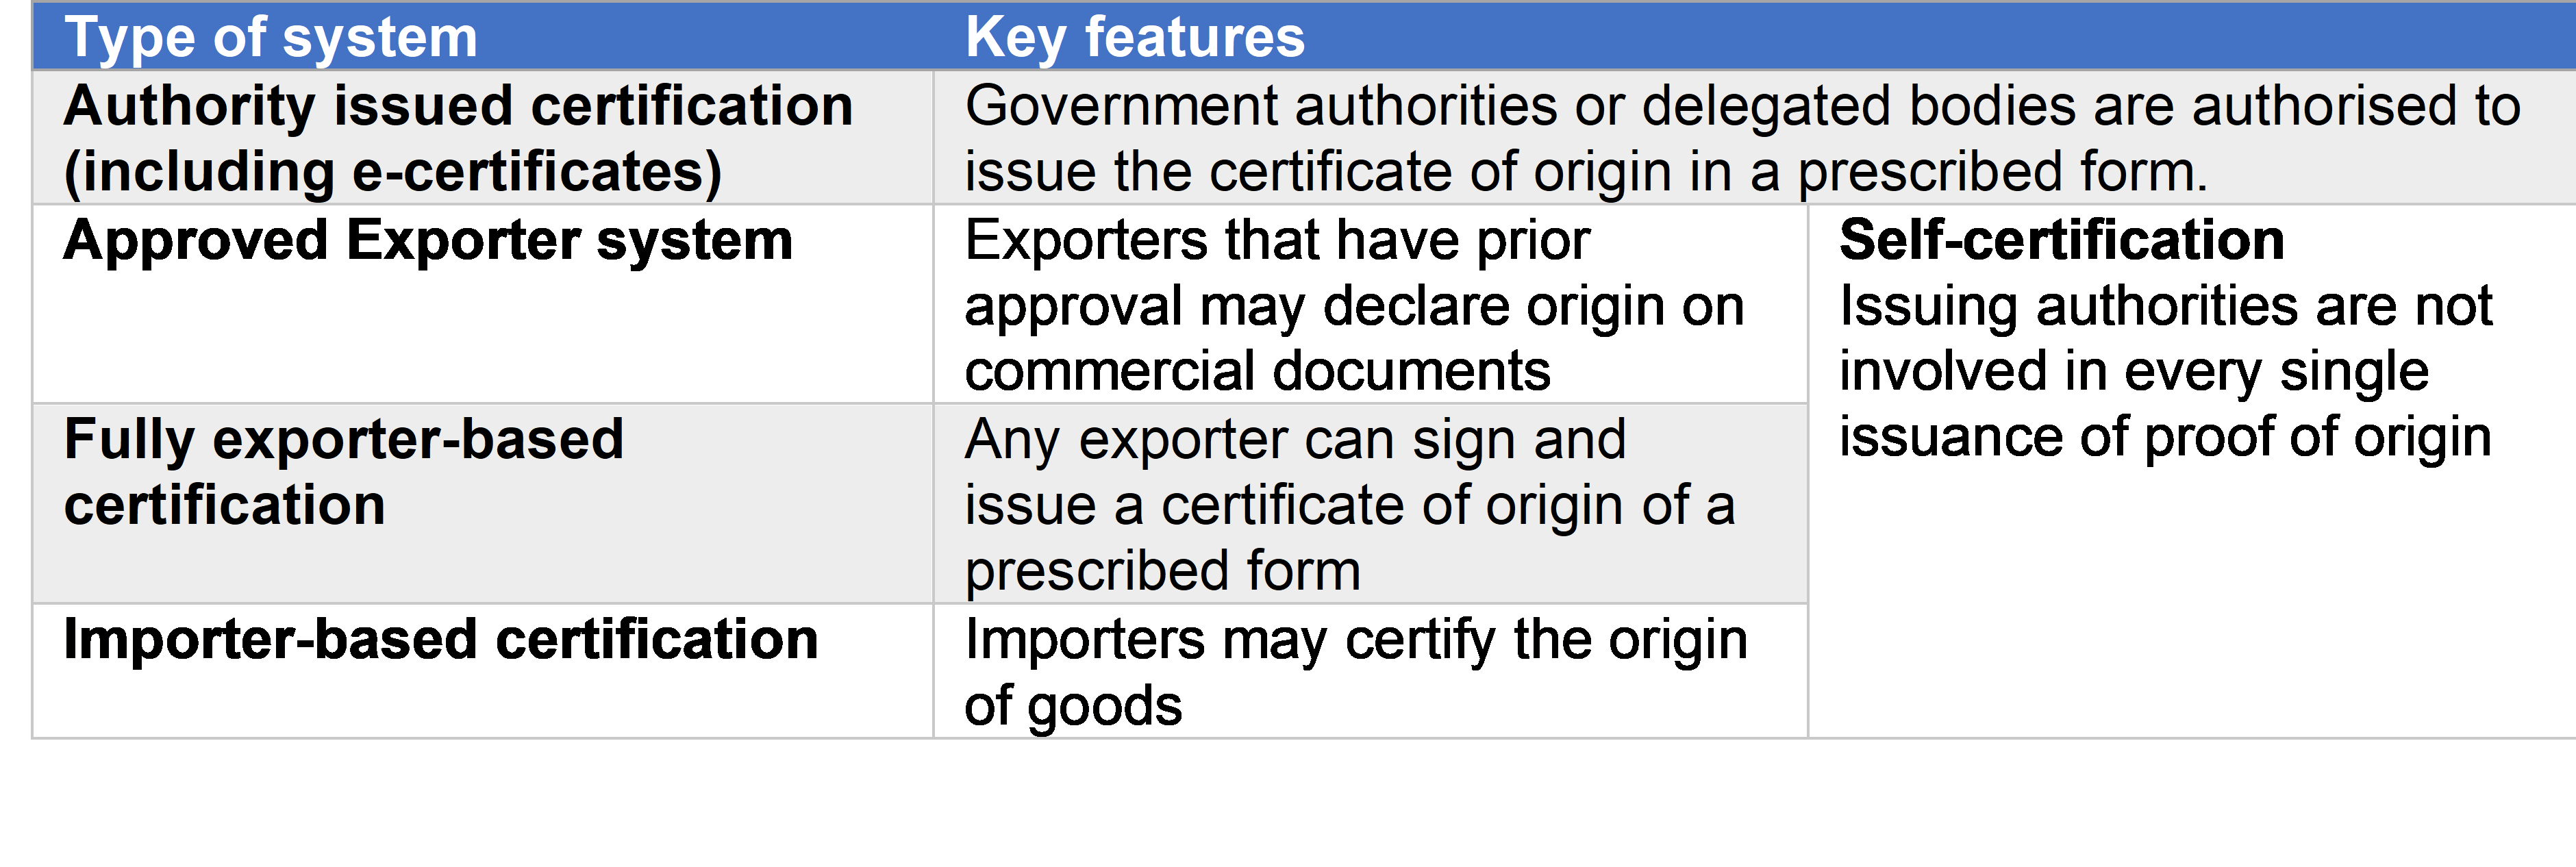 Table of different types of authentication systems